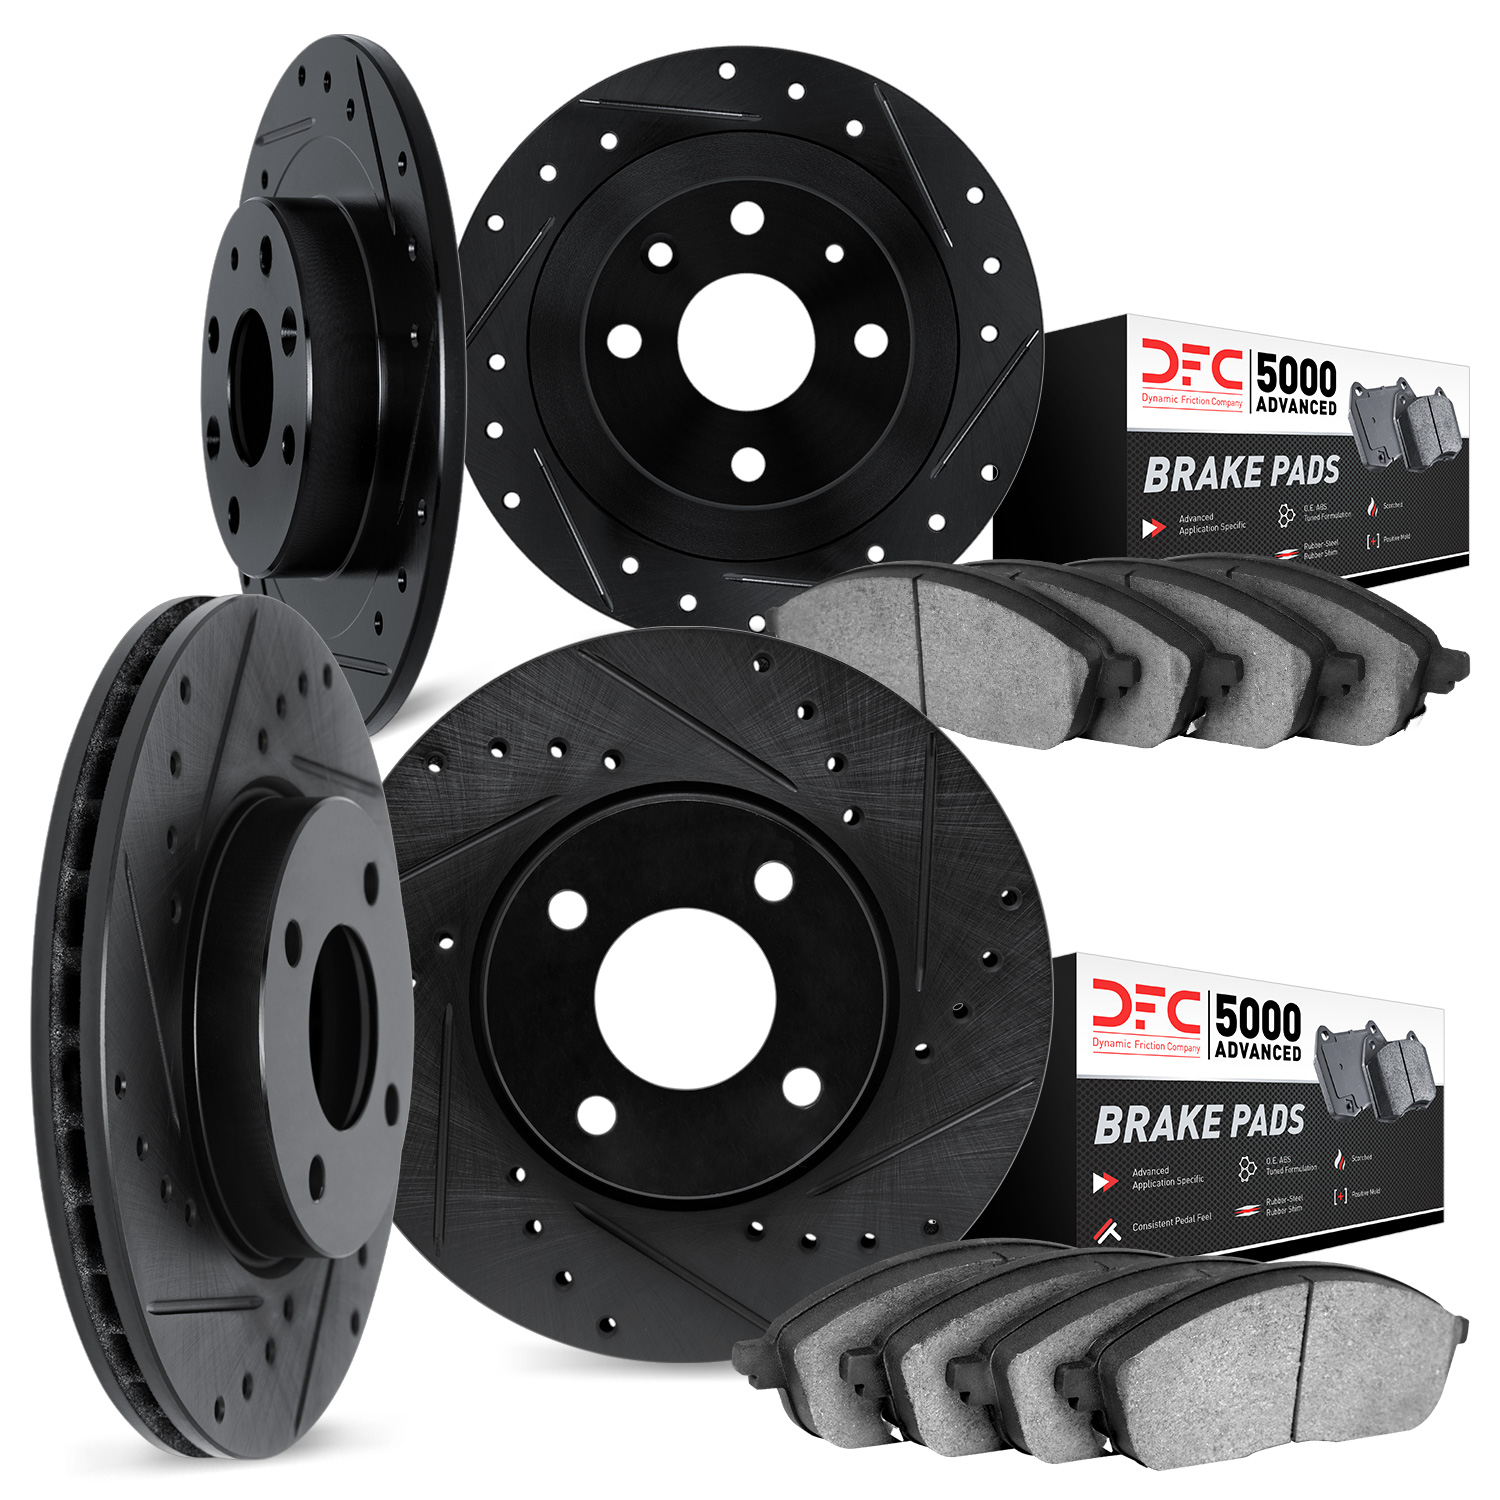 8504-01000 Drilled/Slotted Brake Rotors w/5000 Advanced Brake Pads Kit [Black], 1989-1994 Suzuki, Position: Front and Rear